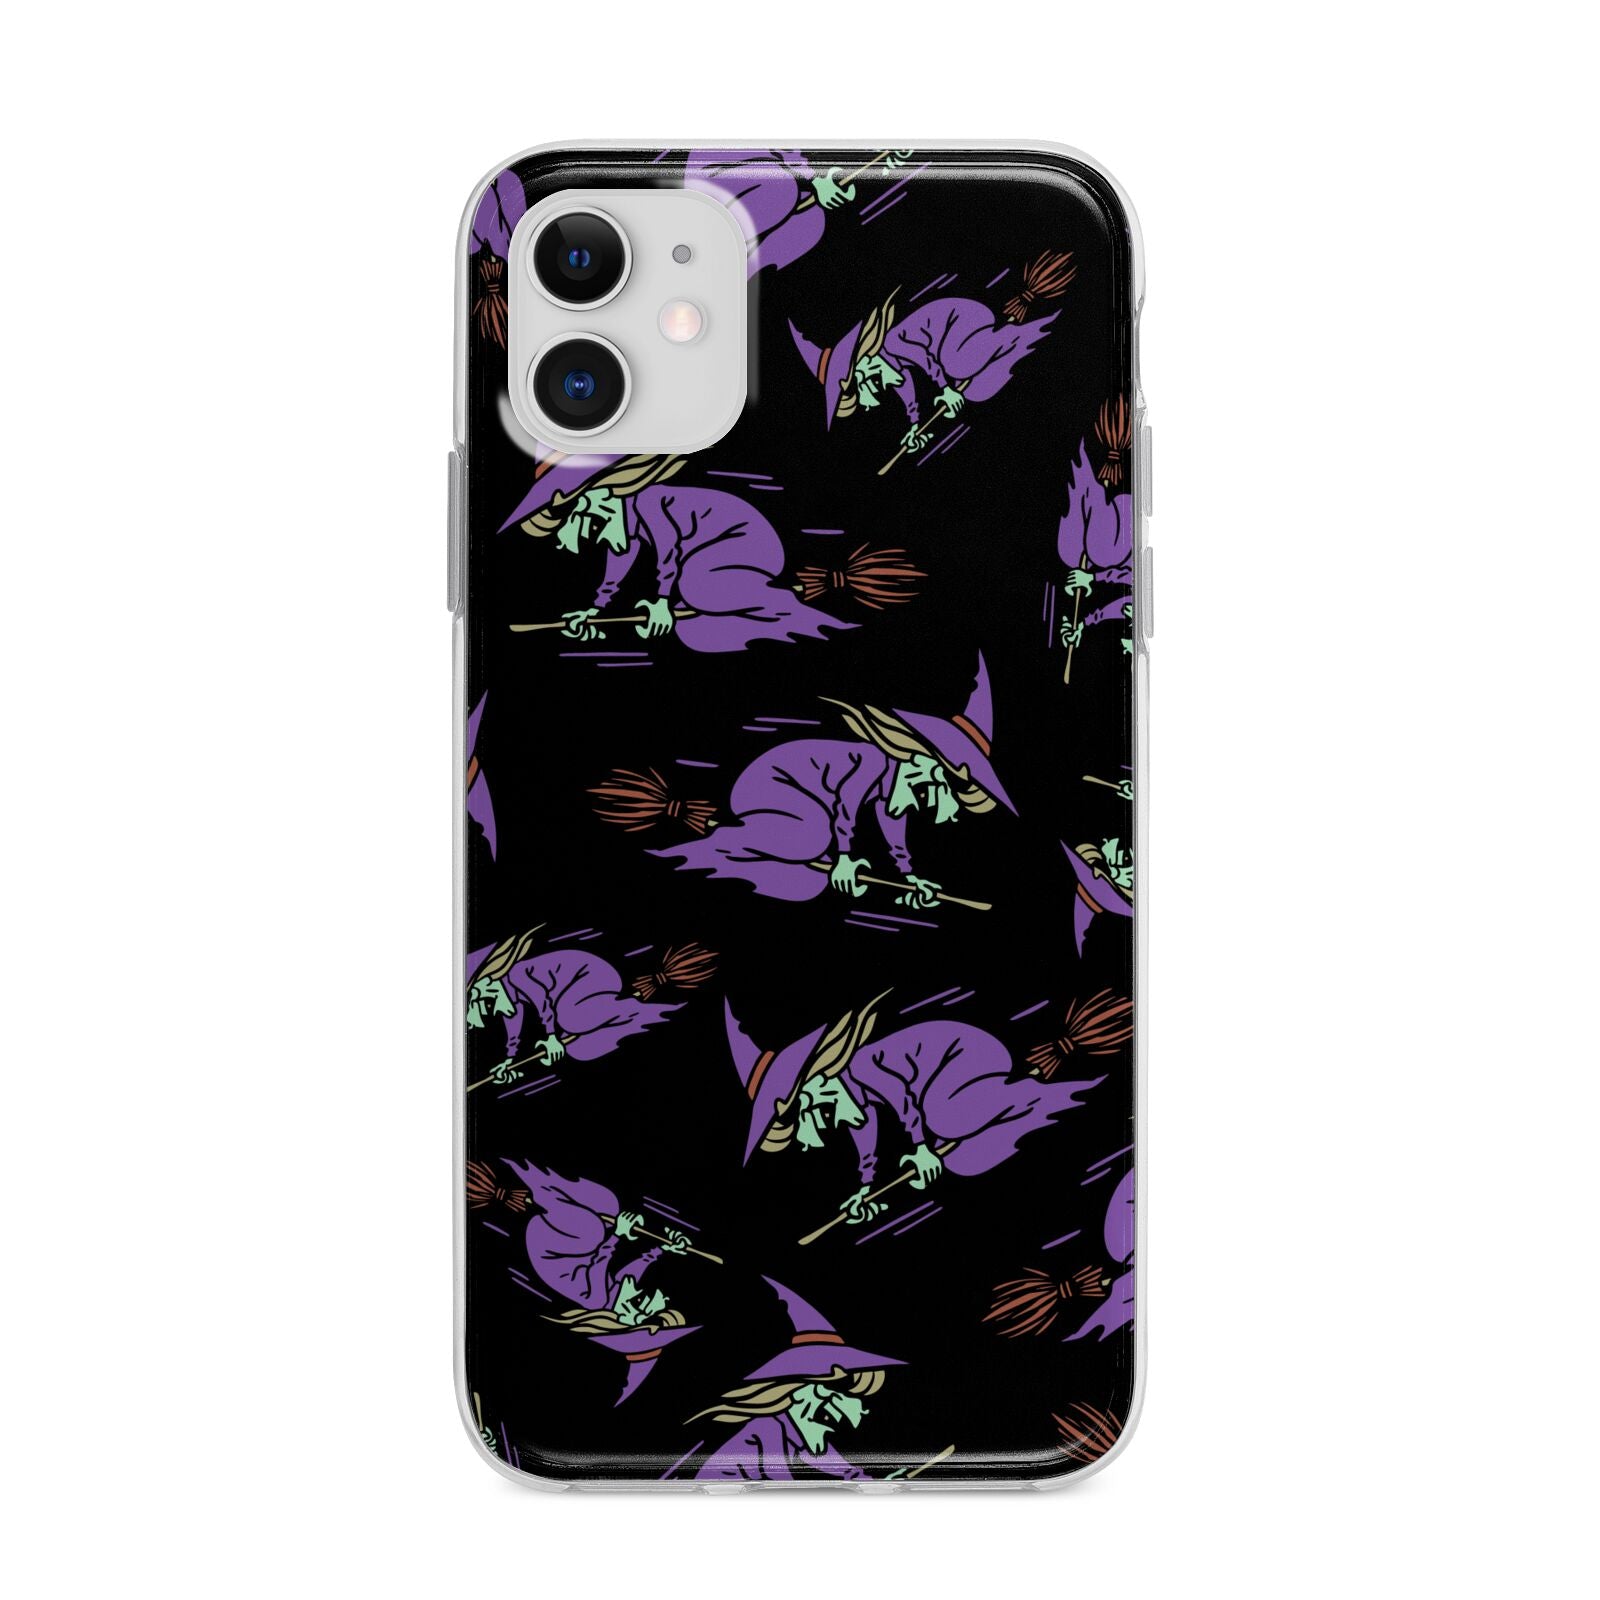 Flying Witches Apple iPhone 11 in White with Bumper Case